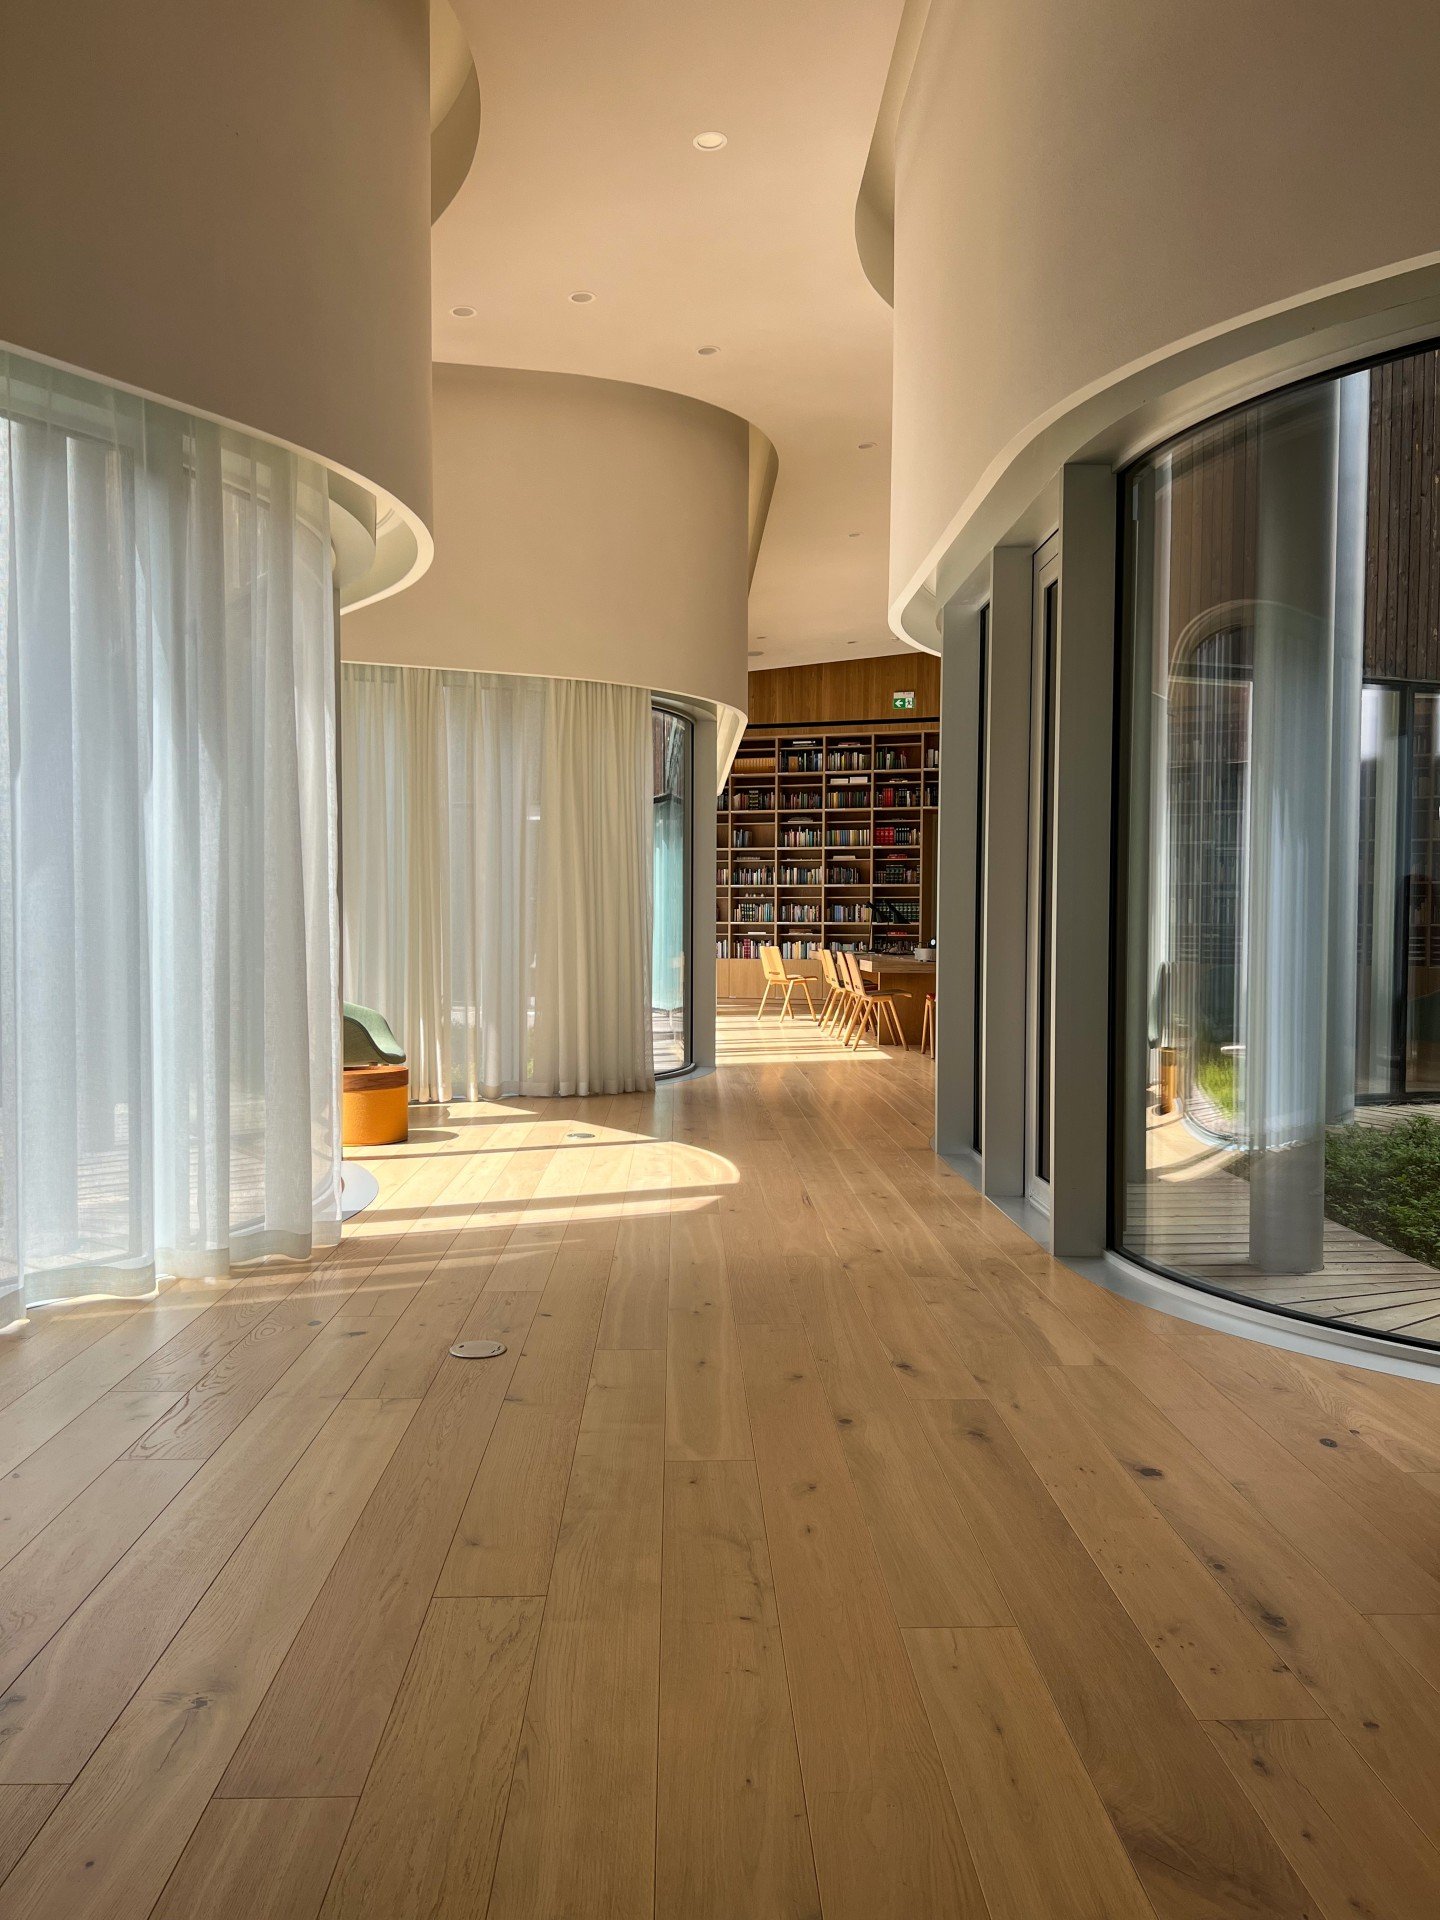 Image of light-filled library or office.